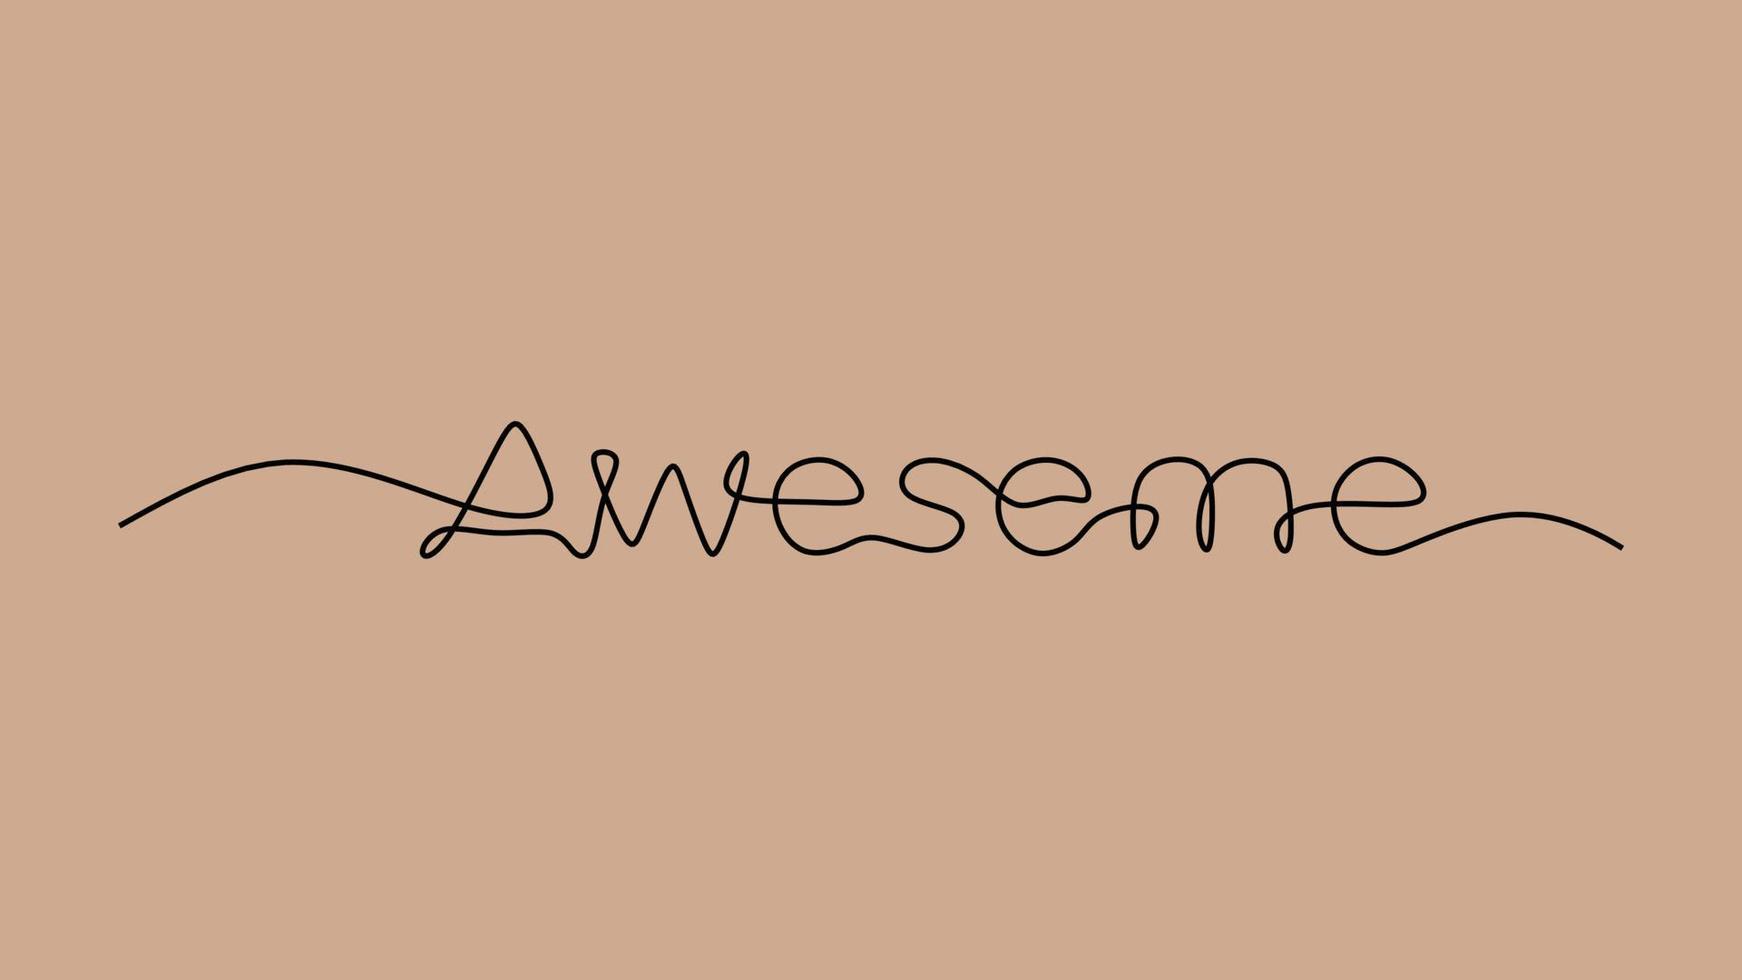 Awesome word text oneline continuous editable line art vector